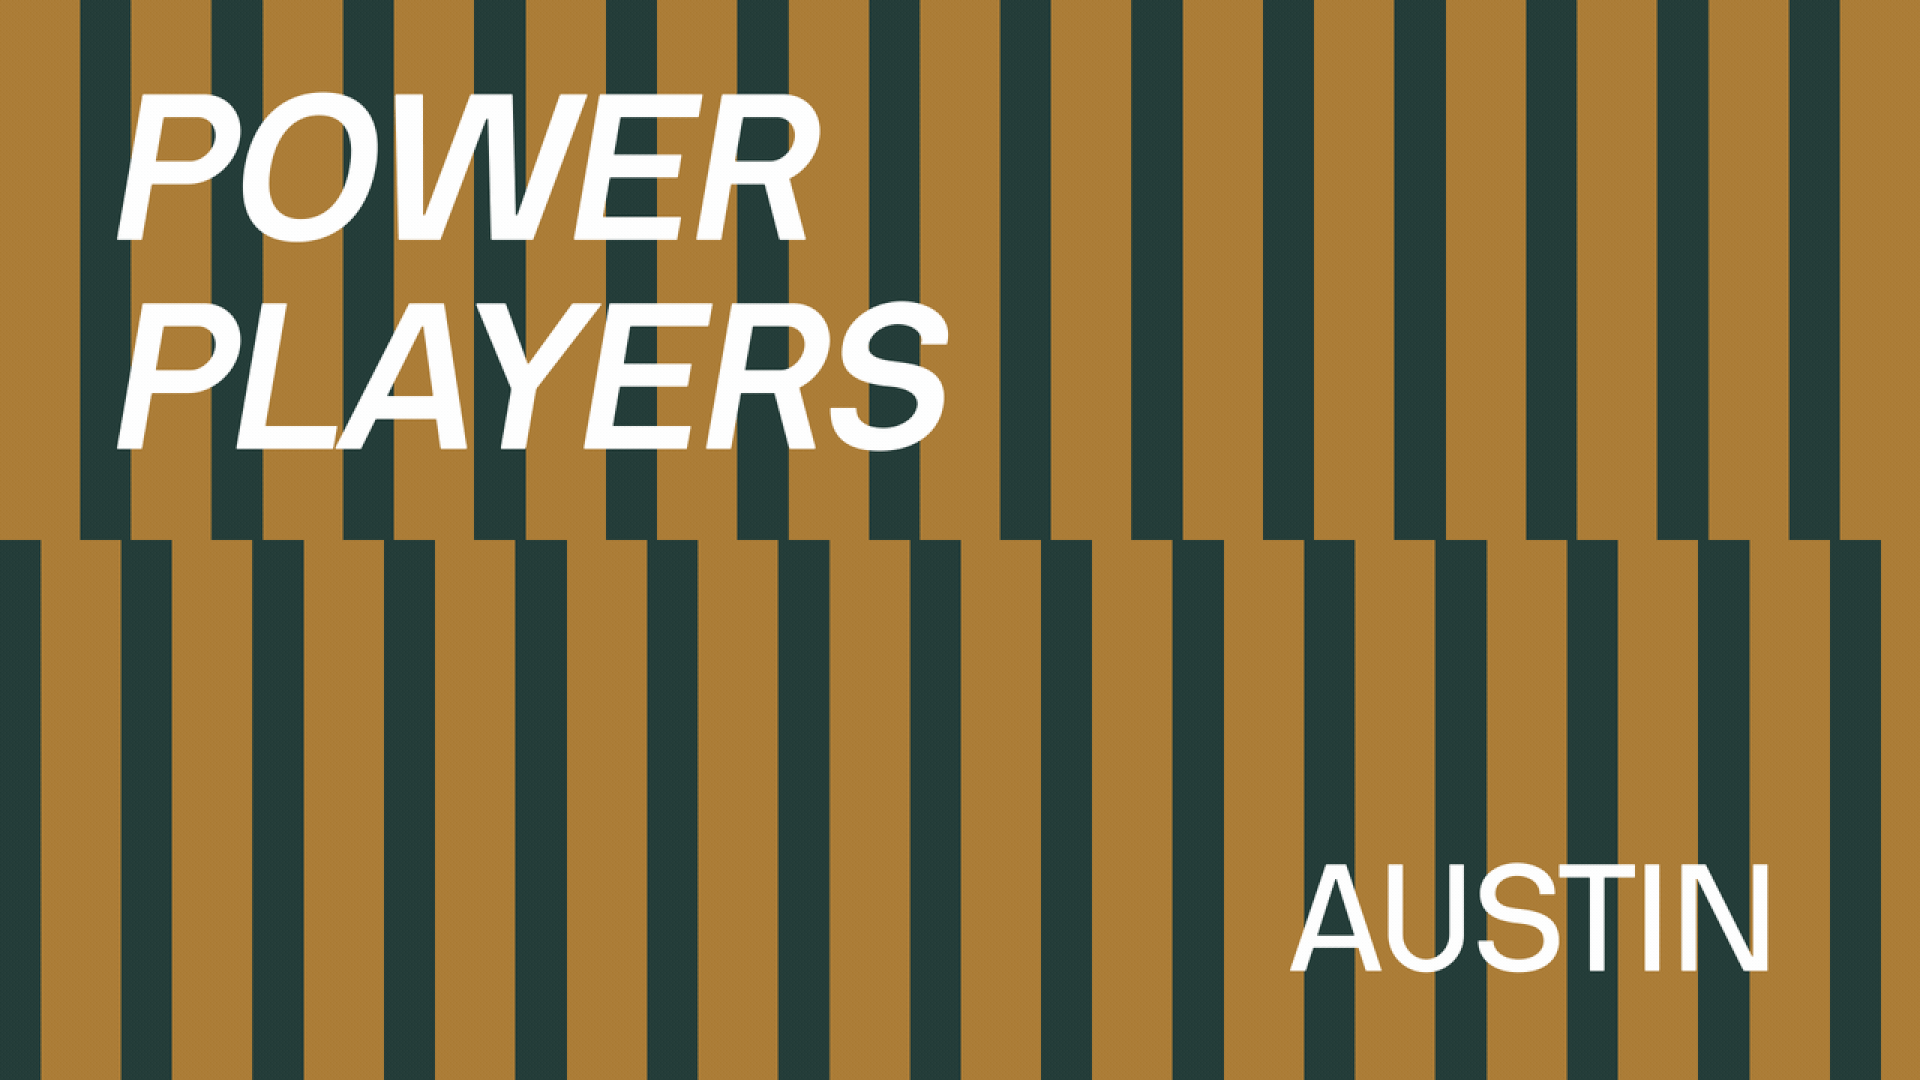 Illustration of two rows of dominos falling with text overlaid that reads Power Players Austin.